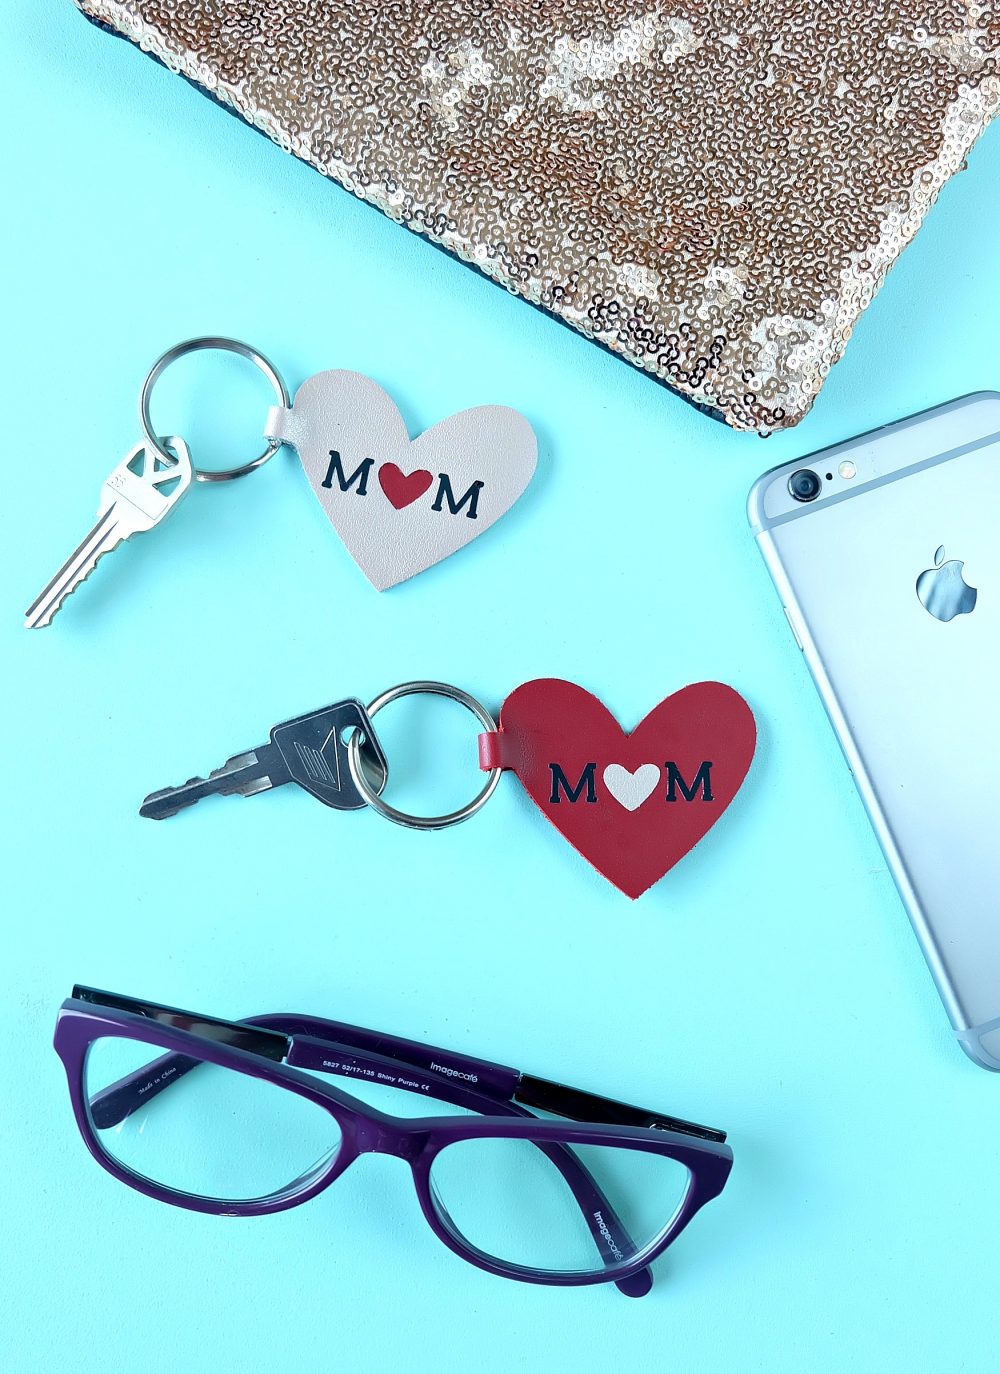 This quick and easy 10 minute Cricut project makes a great handmade gift for mom! Learn how to cut leather using your Cricut and make this DIY Leather Heart Mom Keychain! Includes a cut file as well as step by step photos including how to apply htv to leather! #MothersDay #CricutProject #handmadegift #Mom #Cricut